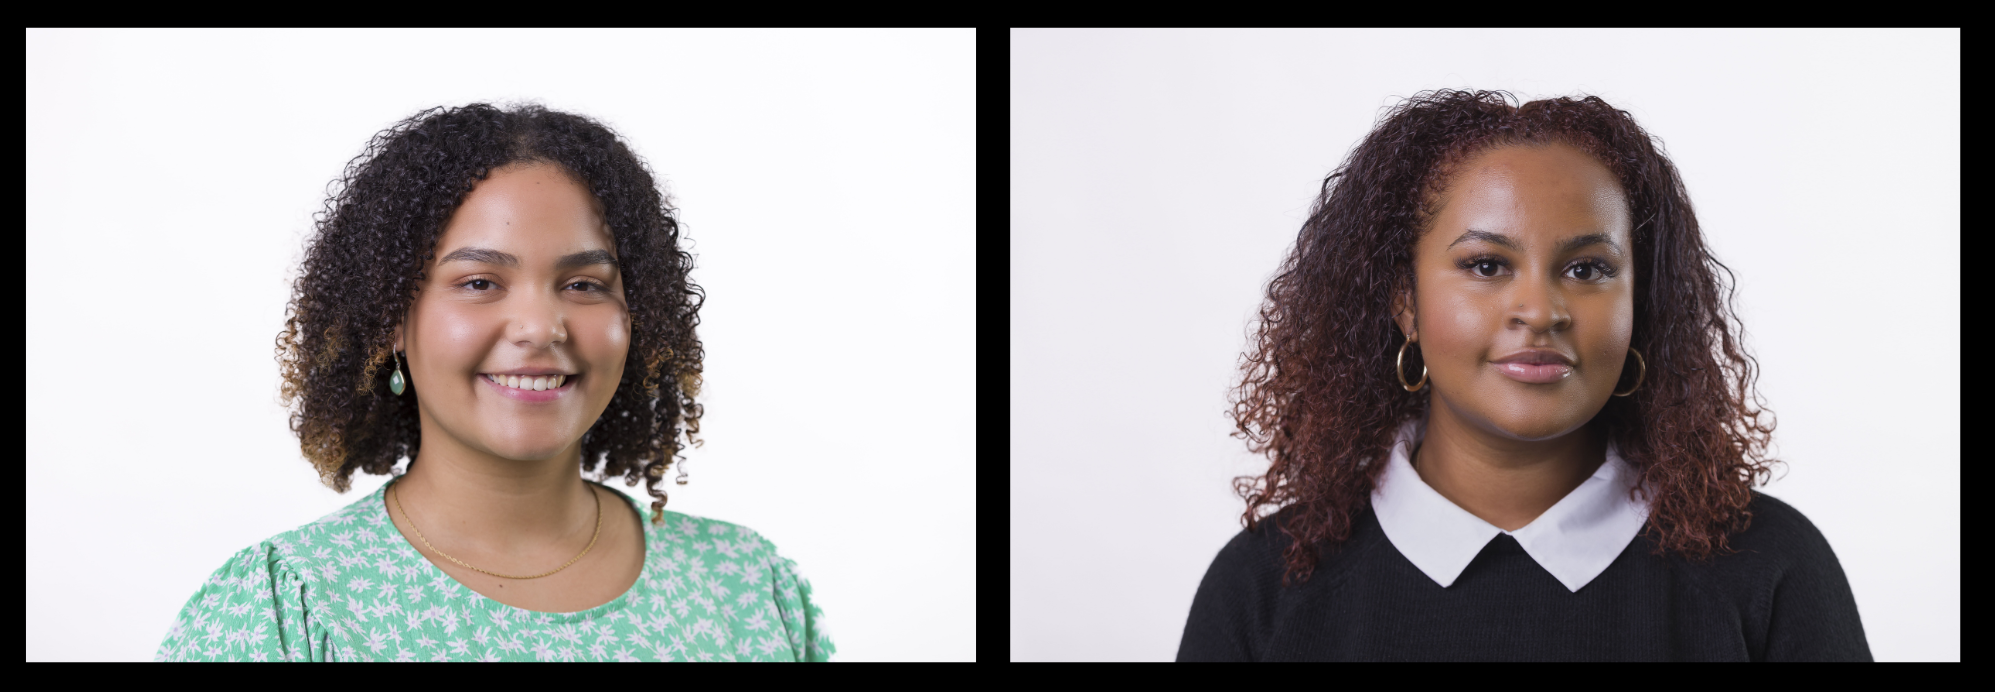 A composite of two photos of Rosie Ngugi and China Rooms, cropped to head and shoulders. Both are Black women with shoulder length dark hair. They are looking at the camera. Rosie wears a green and white blouse. China wears a black top with white collar.